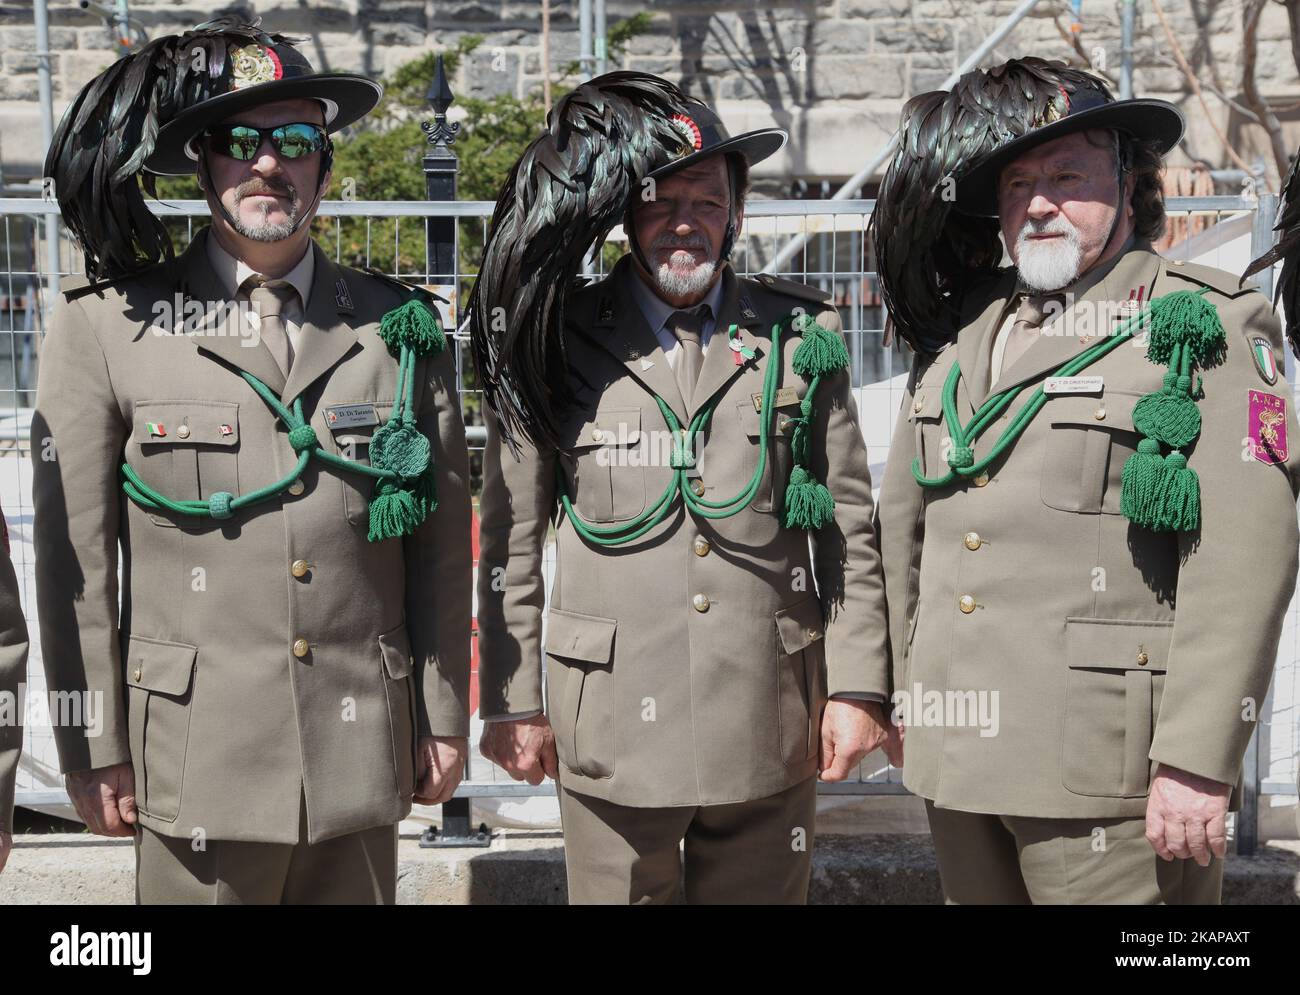 Members of the Bersaglieri (marksmen corps of the Italian Army) during the Good Friday procession in Little Italy in Toronto, Ontario, Canada, on April 14, 2017. The Bersaglieri can be recognized by the distinctive wide brimmed hat that they wear (only in dress uniform), decorated with black capercaillie feathers. The Saint Francis of Assisi Church and Little Italy community celebrated Good Friday with a traditional procession representing the events that led to the Crucifixion and Resurrection of Jesus Christ. (Photo by Creative Touch Imaging Ltd./NurPhoto) *** Please Use Credit from Credit F Stock Photo